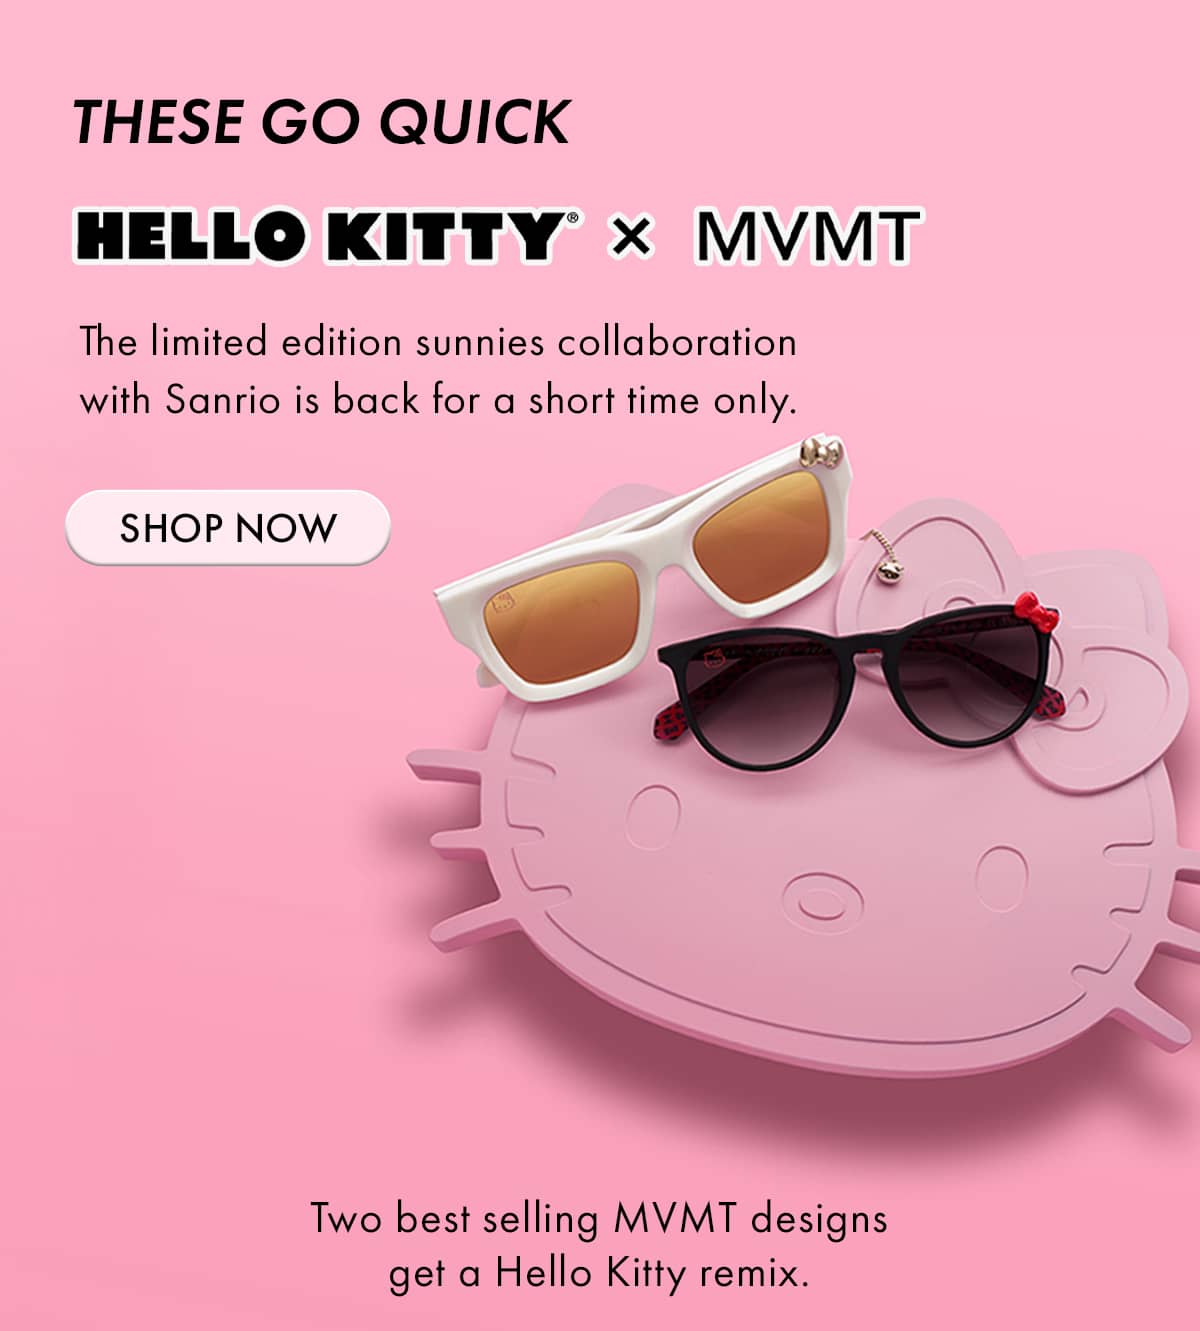 Cute, pink & BACK IN STOCK! Get these limited-edition Hello Kitty